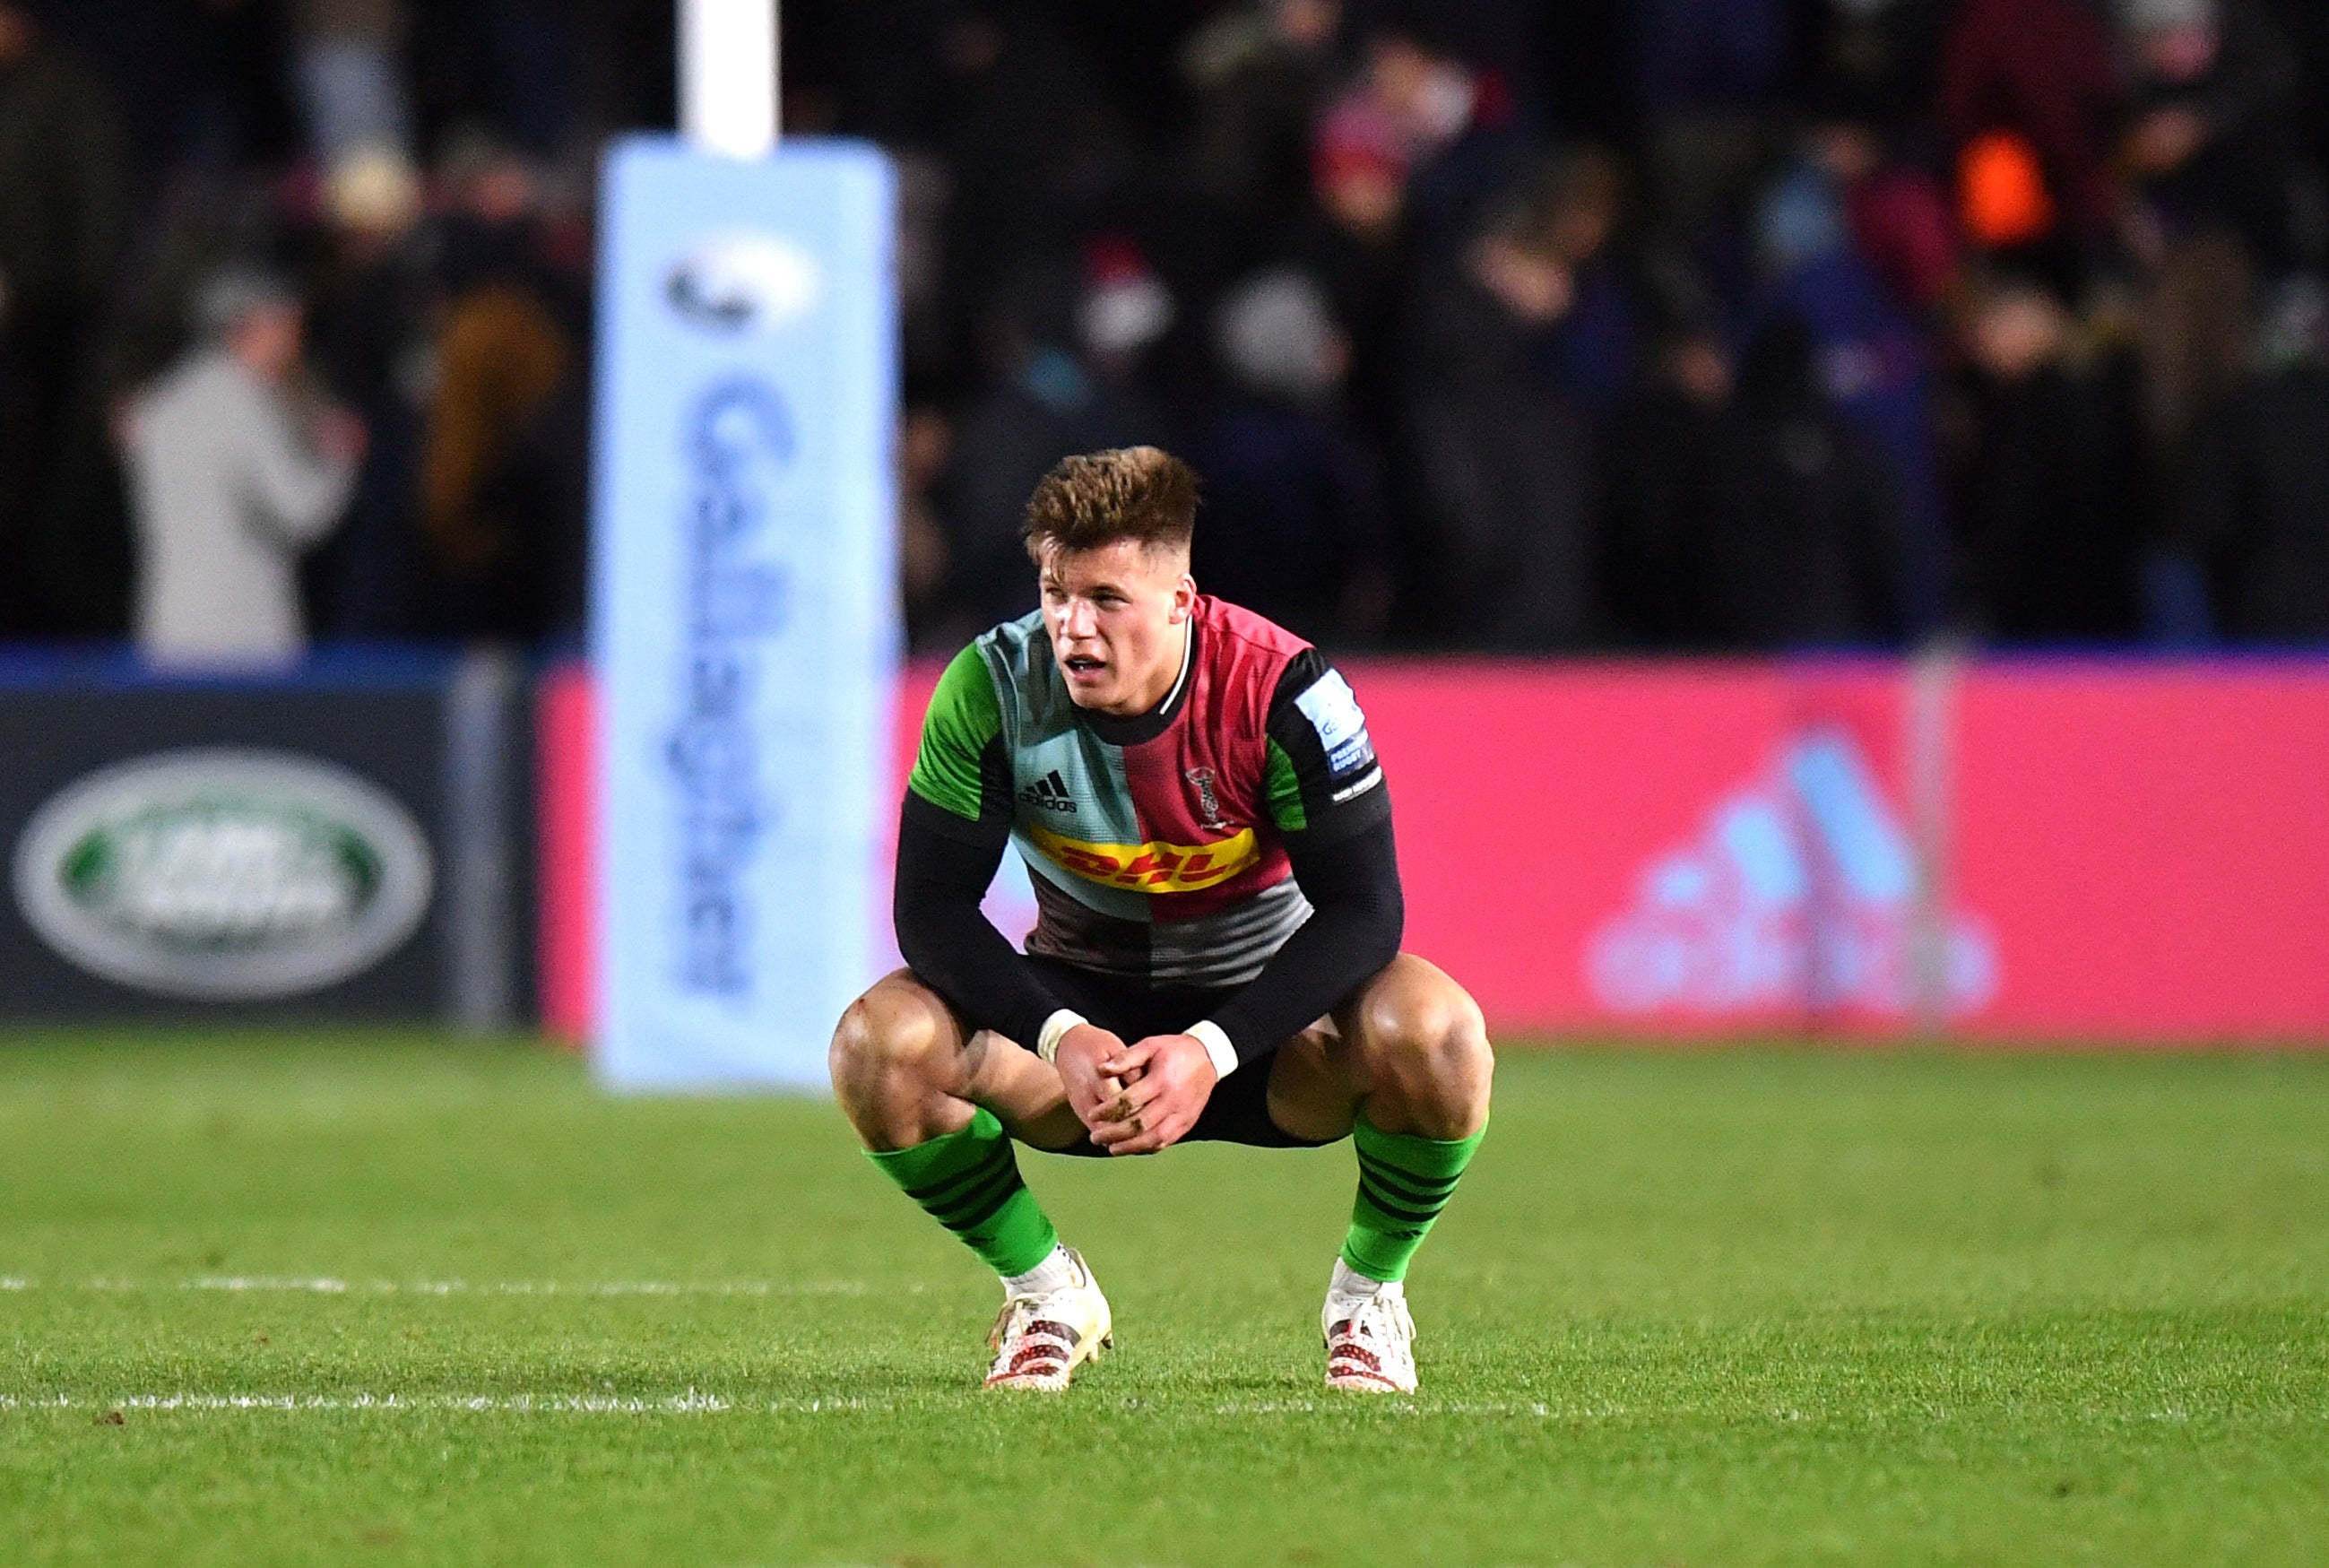 Champions Harlequins were stunned as London Irish picked up just their second win in the Gallagher Premiership with a narrow 22-19 victory at the Twickenham Stoop (Ashley Western/PA Wire)